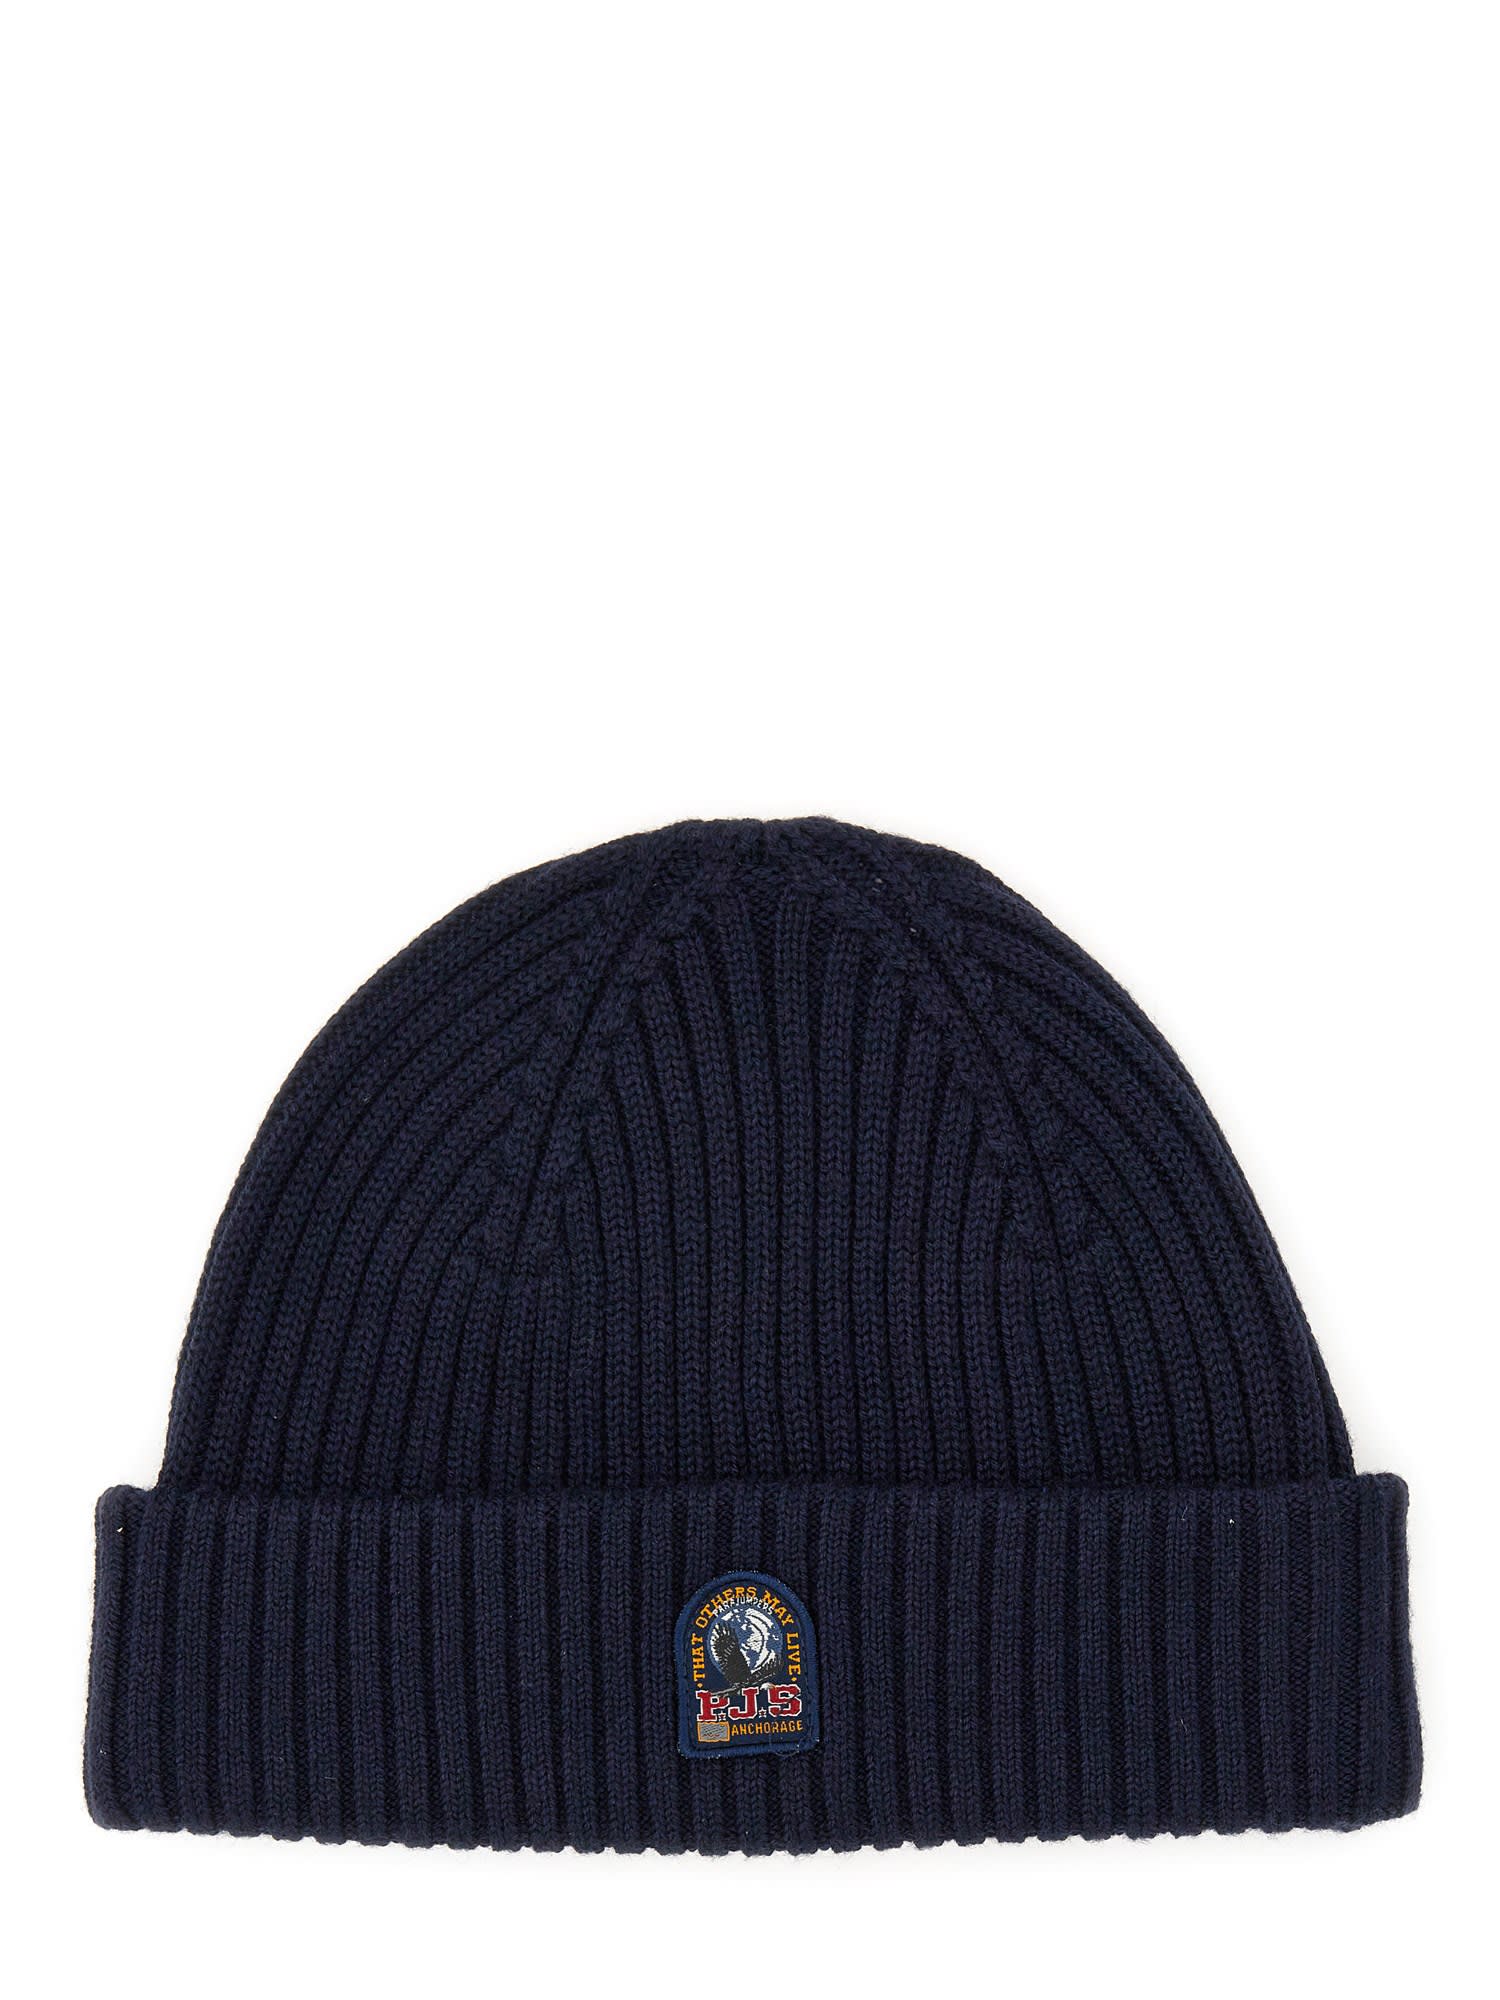 PARAJUMPERS BEANIE HAT